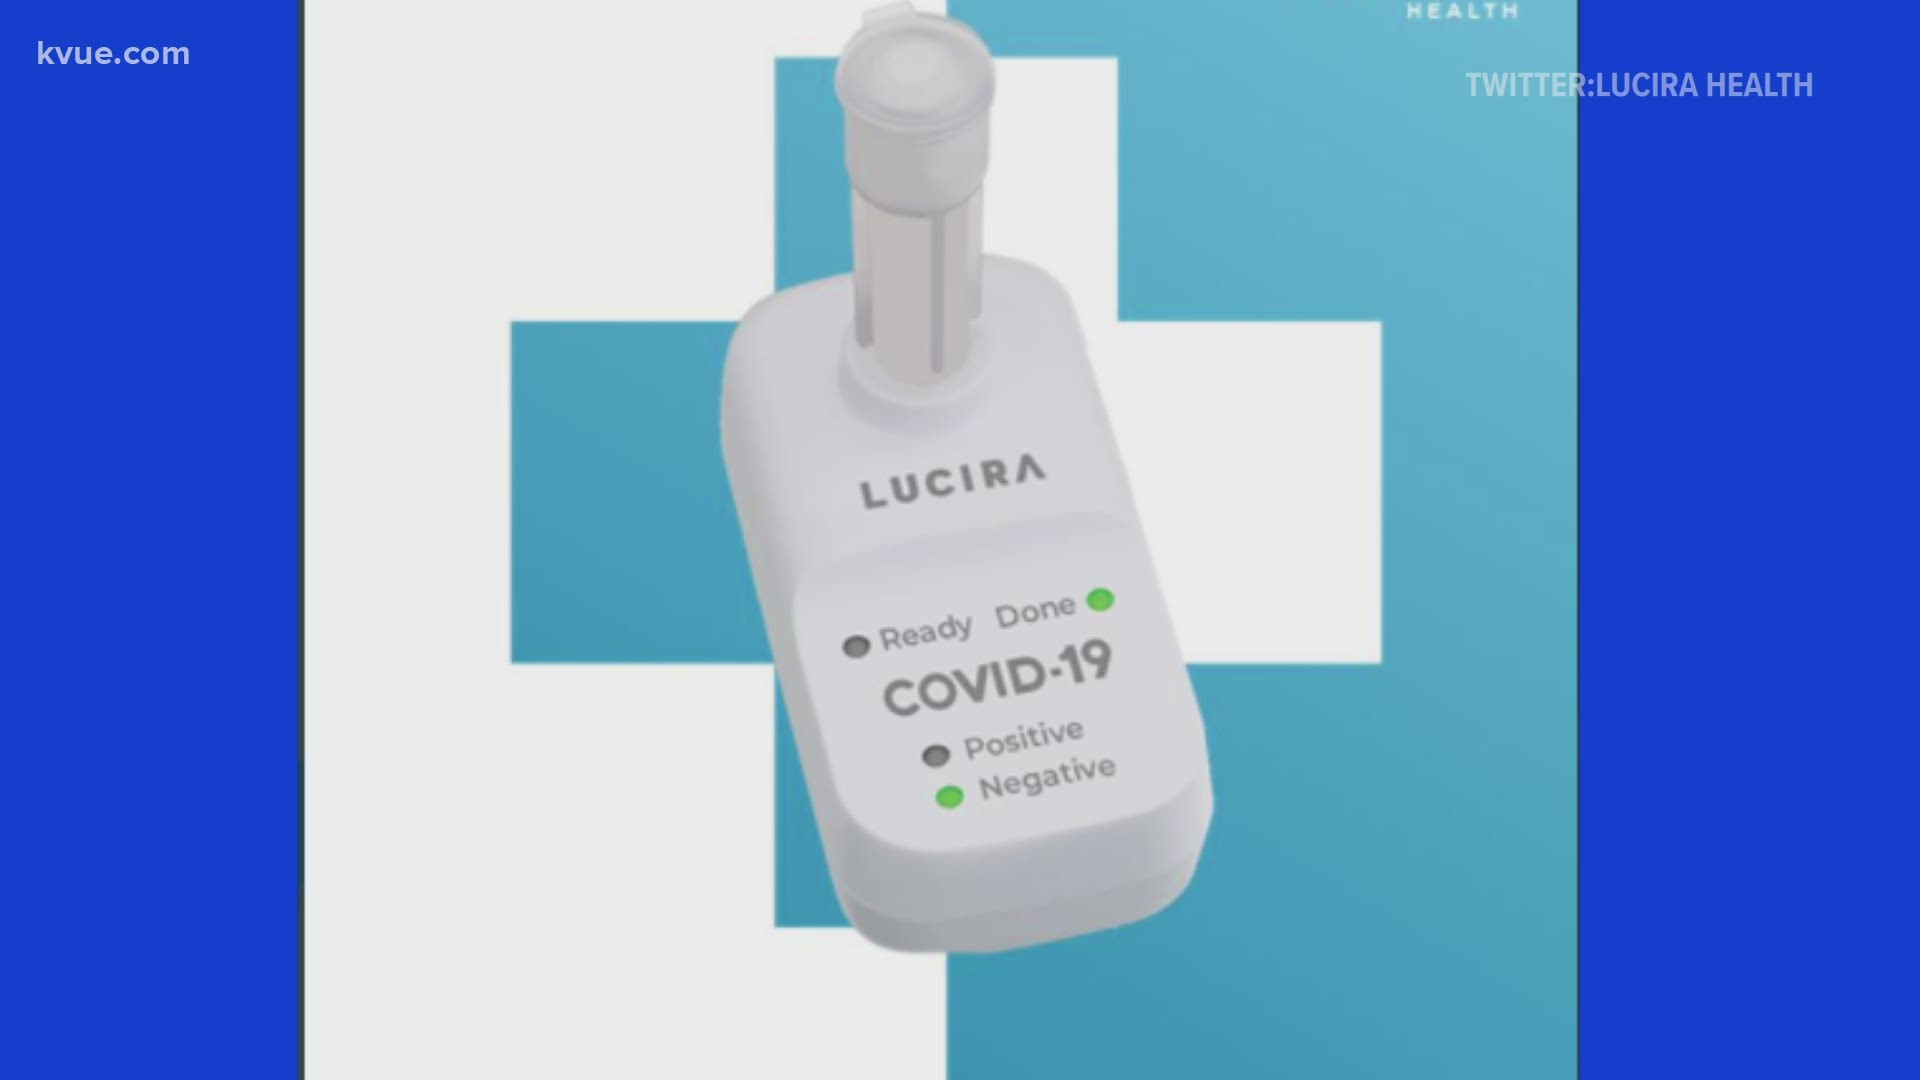 The FDA has approved an all-in-one kit to test for COVID-19 from the comfort of your own home.